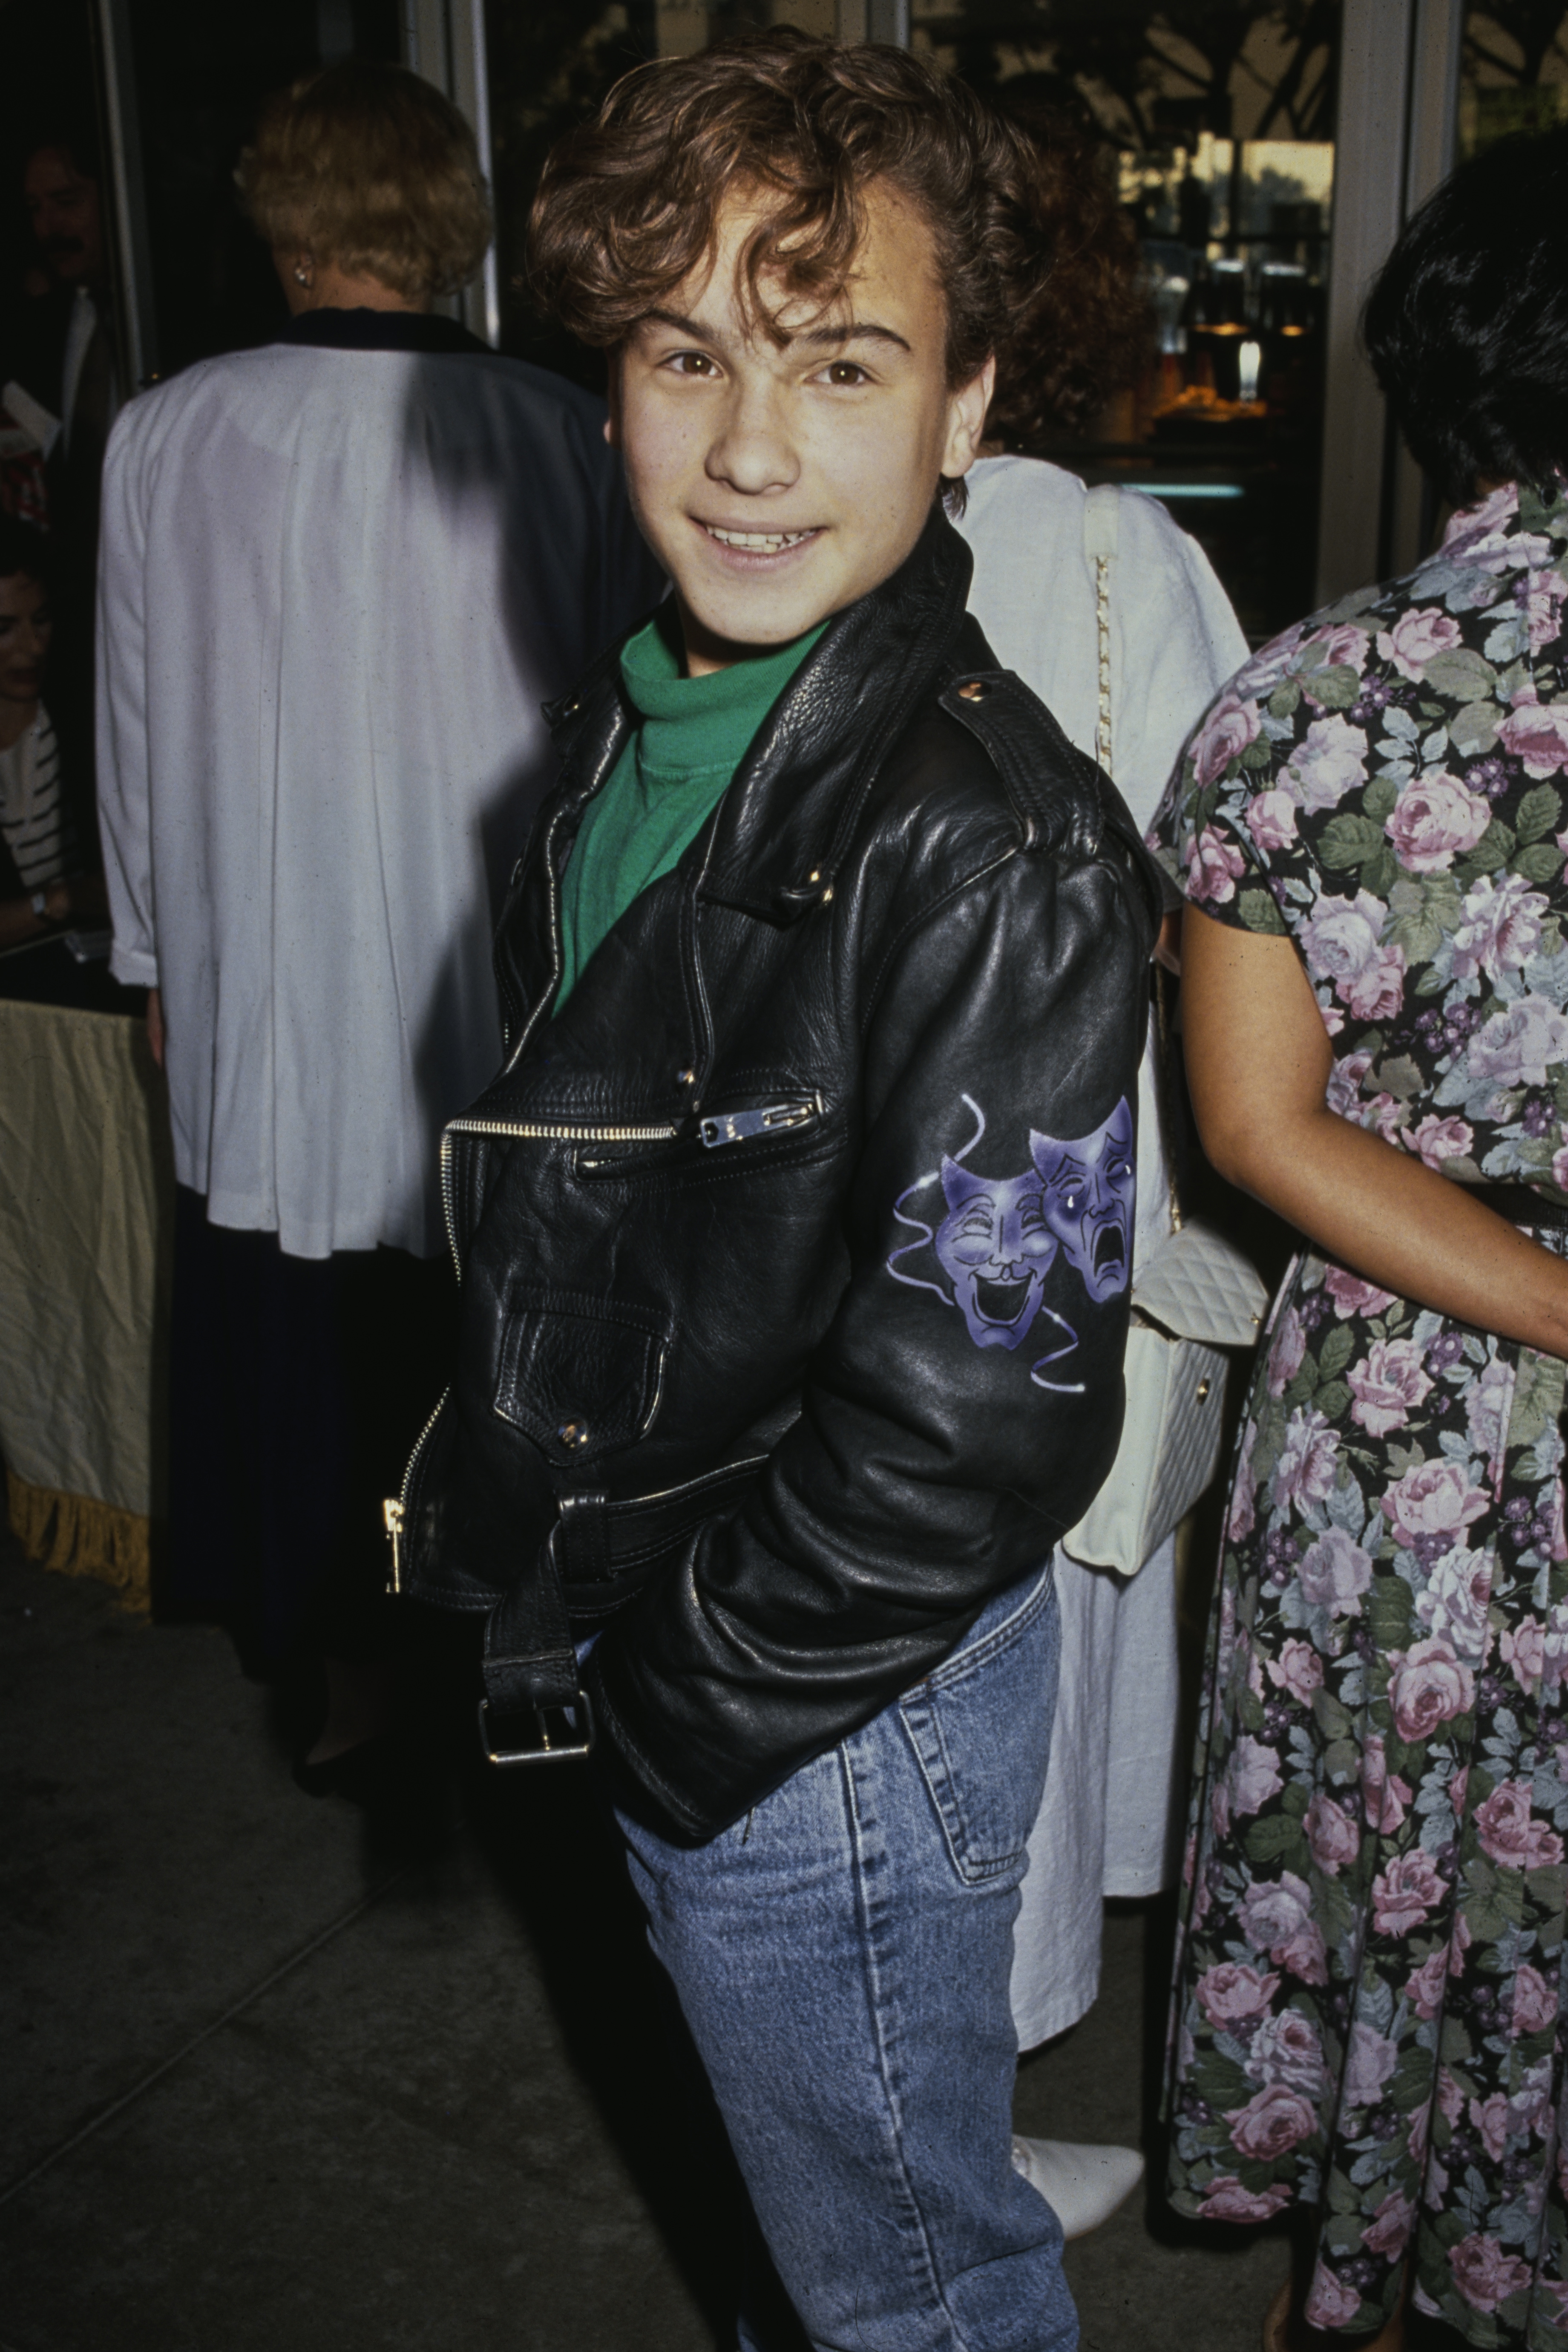 Johnny Galecki attends an event in the United States circa 1990s. | Source: Getty Images